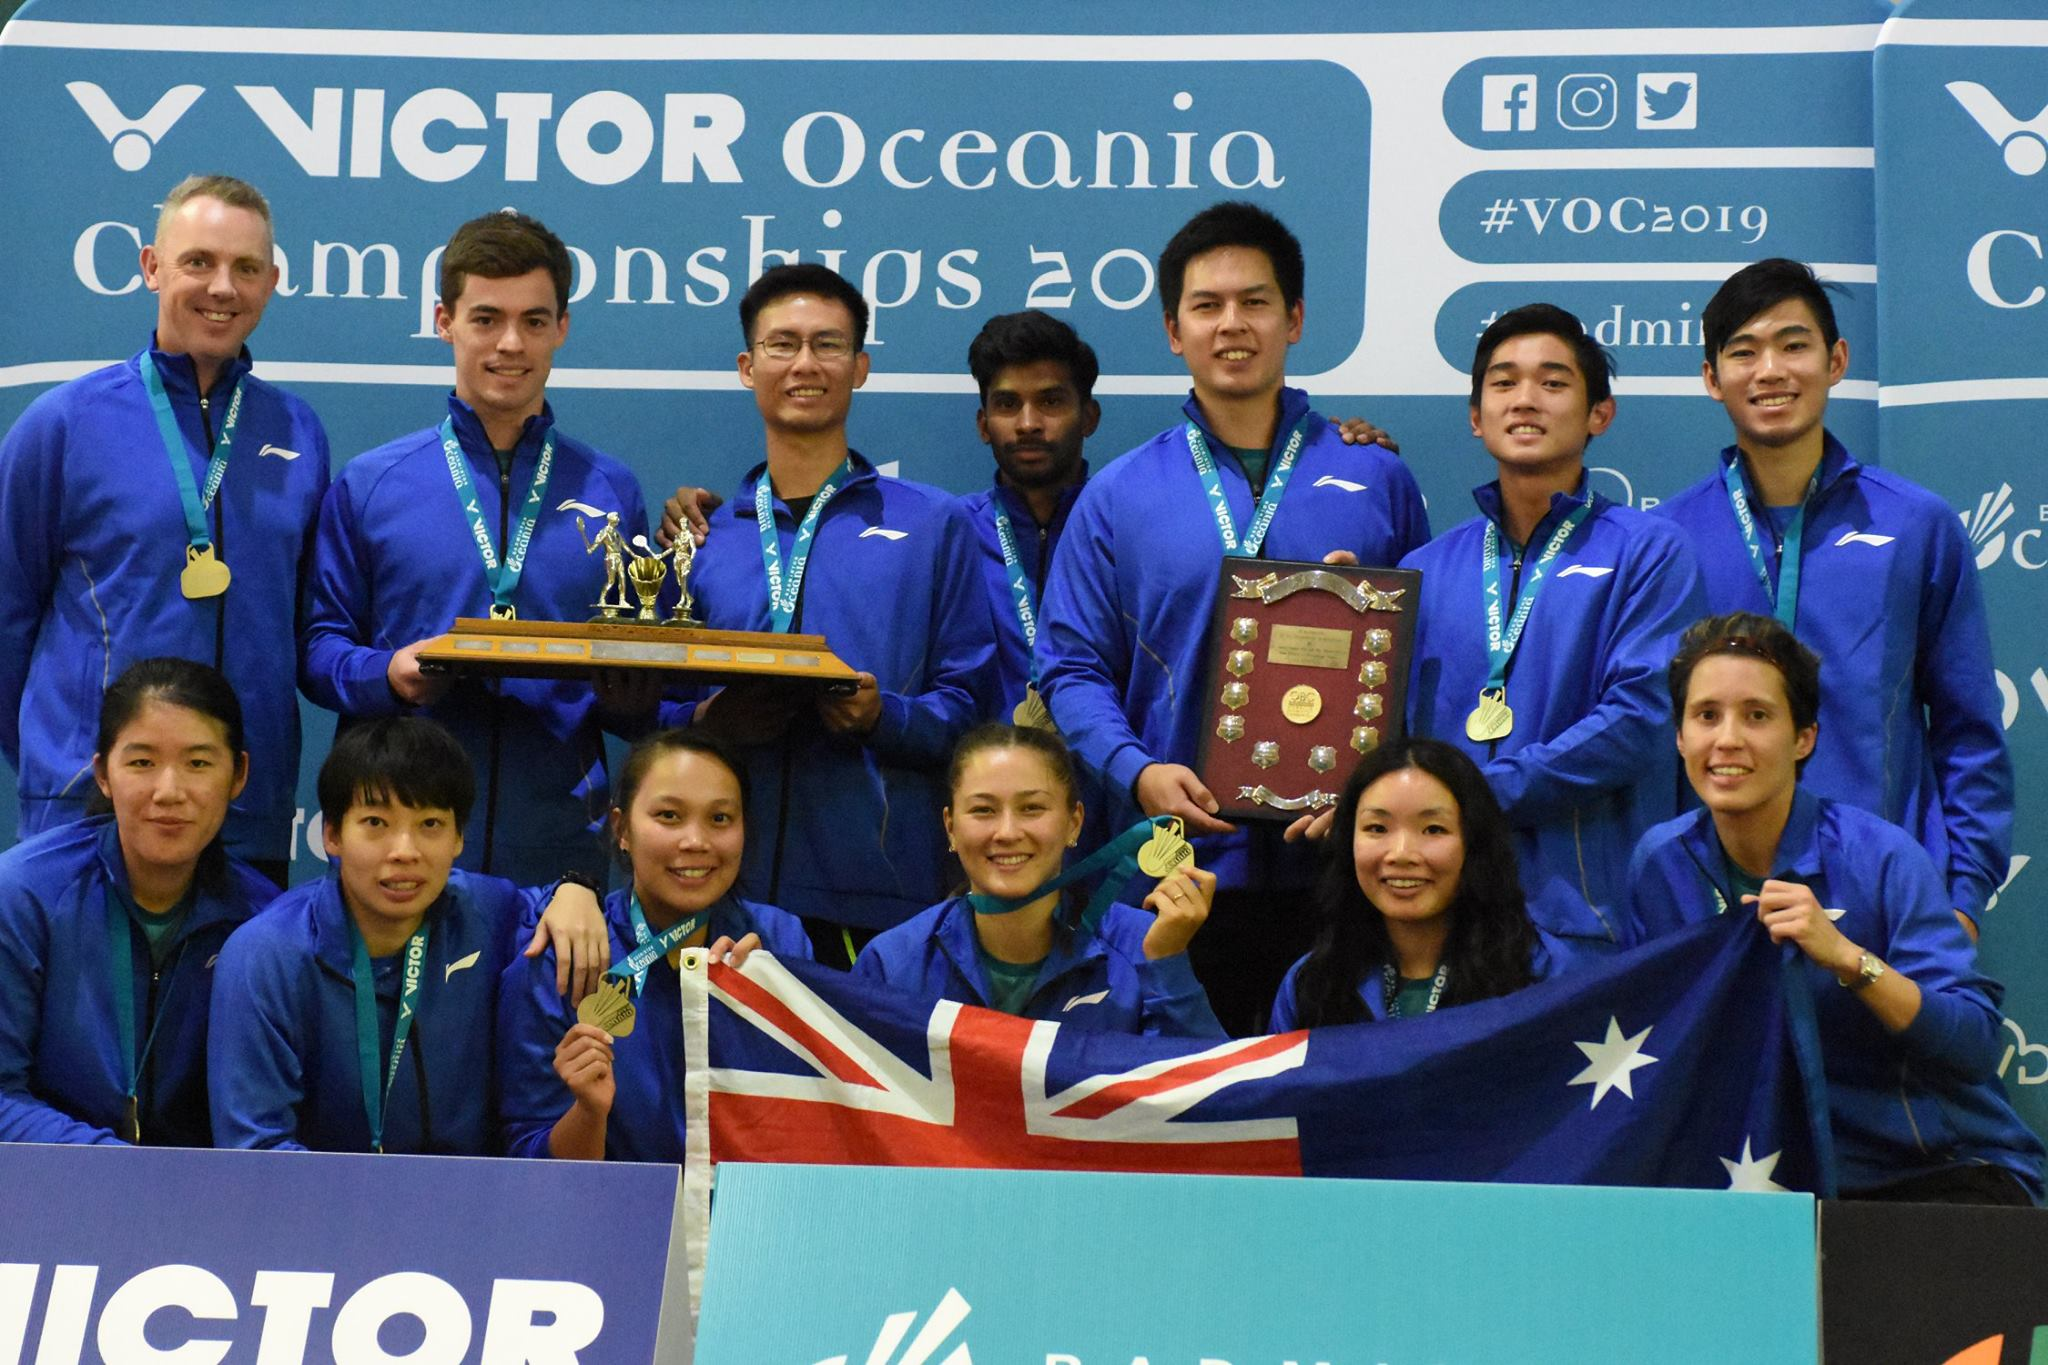 Australia edged New Zealand in the final of the Oceania Mixed Team Badminton Championships to win the title for a fifth consecutive year ©Badminton Oceania